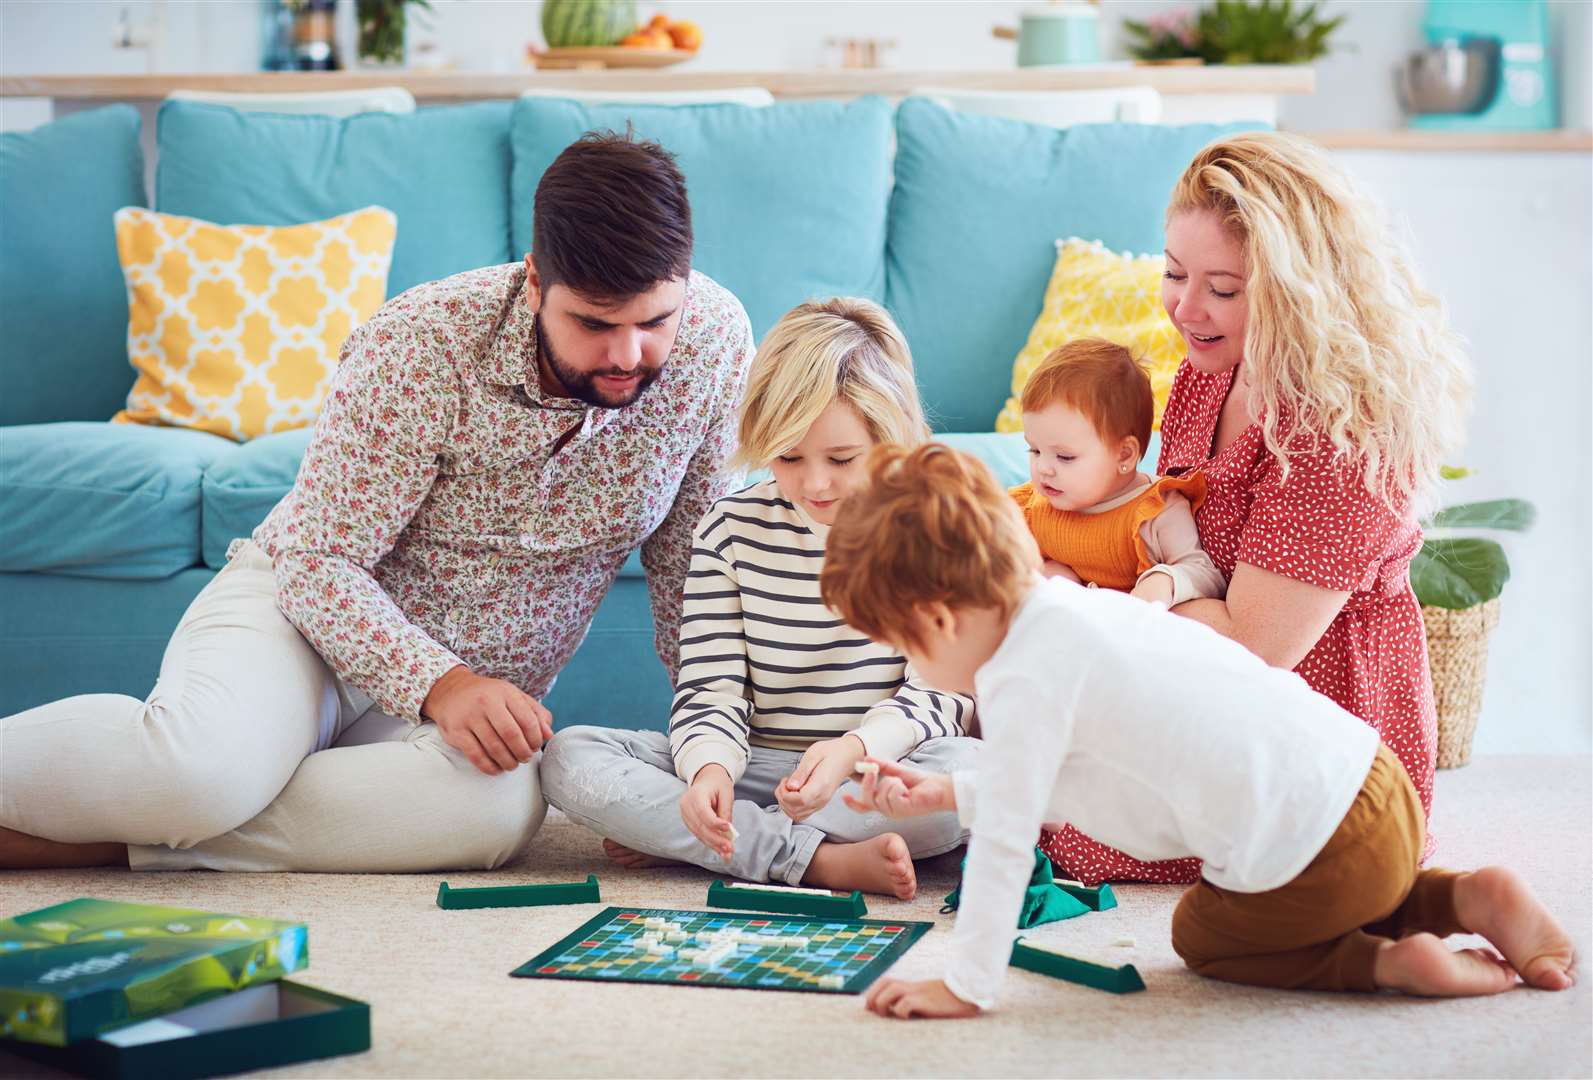 Choose a board game the whole family can join in.